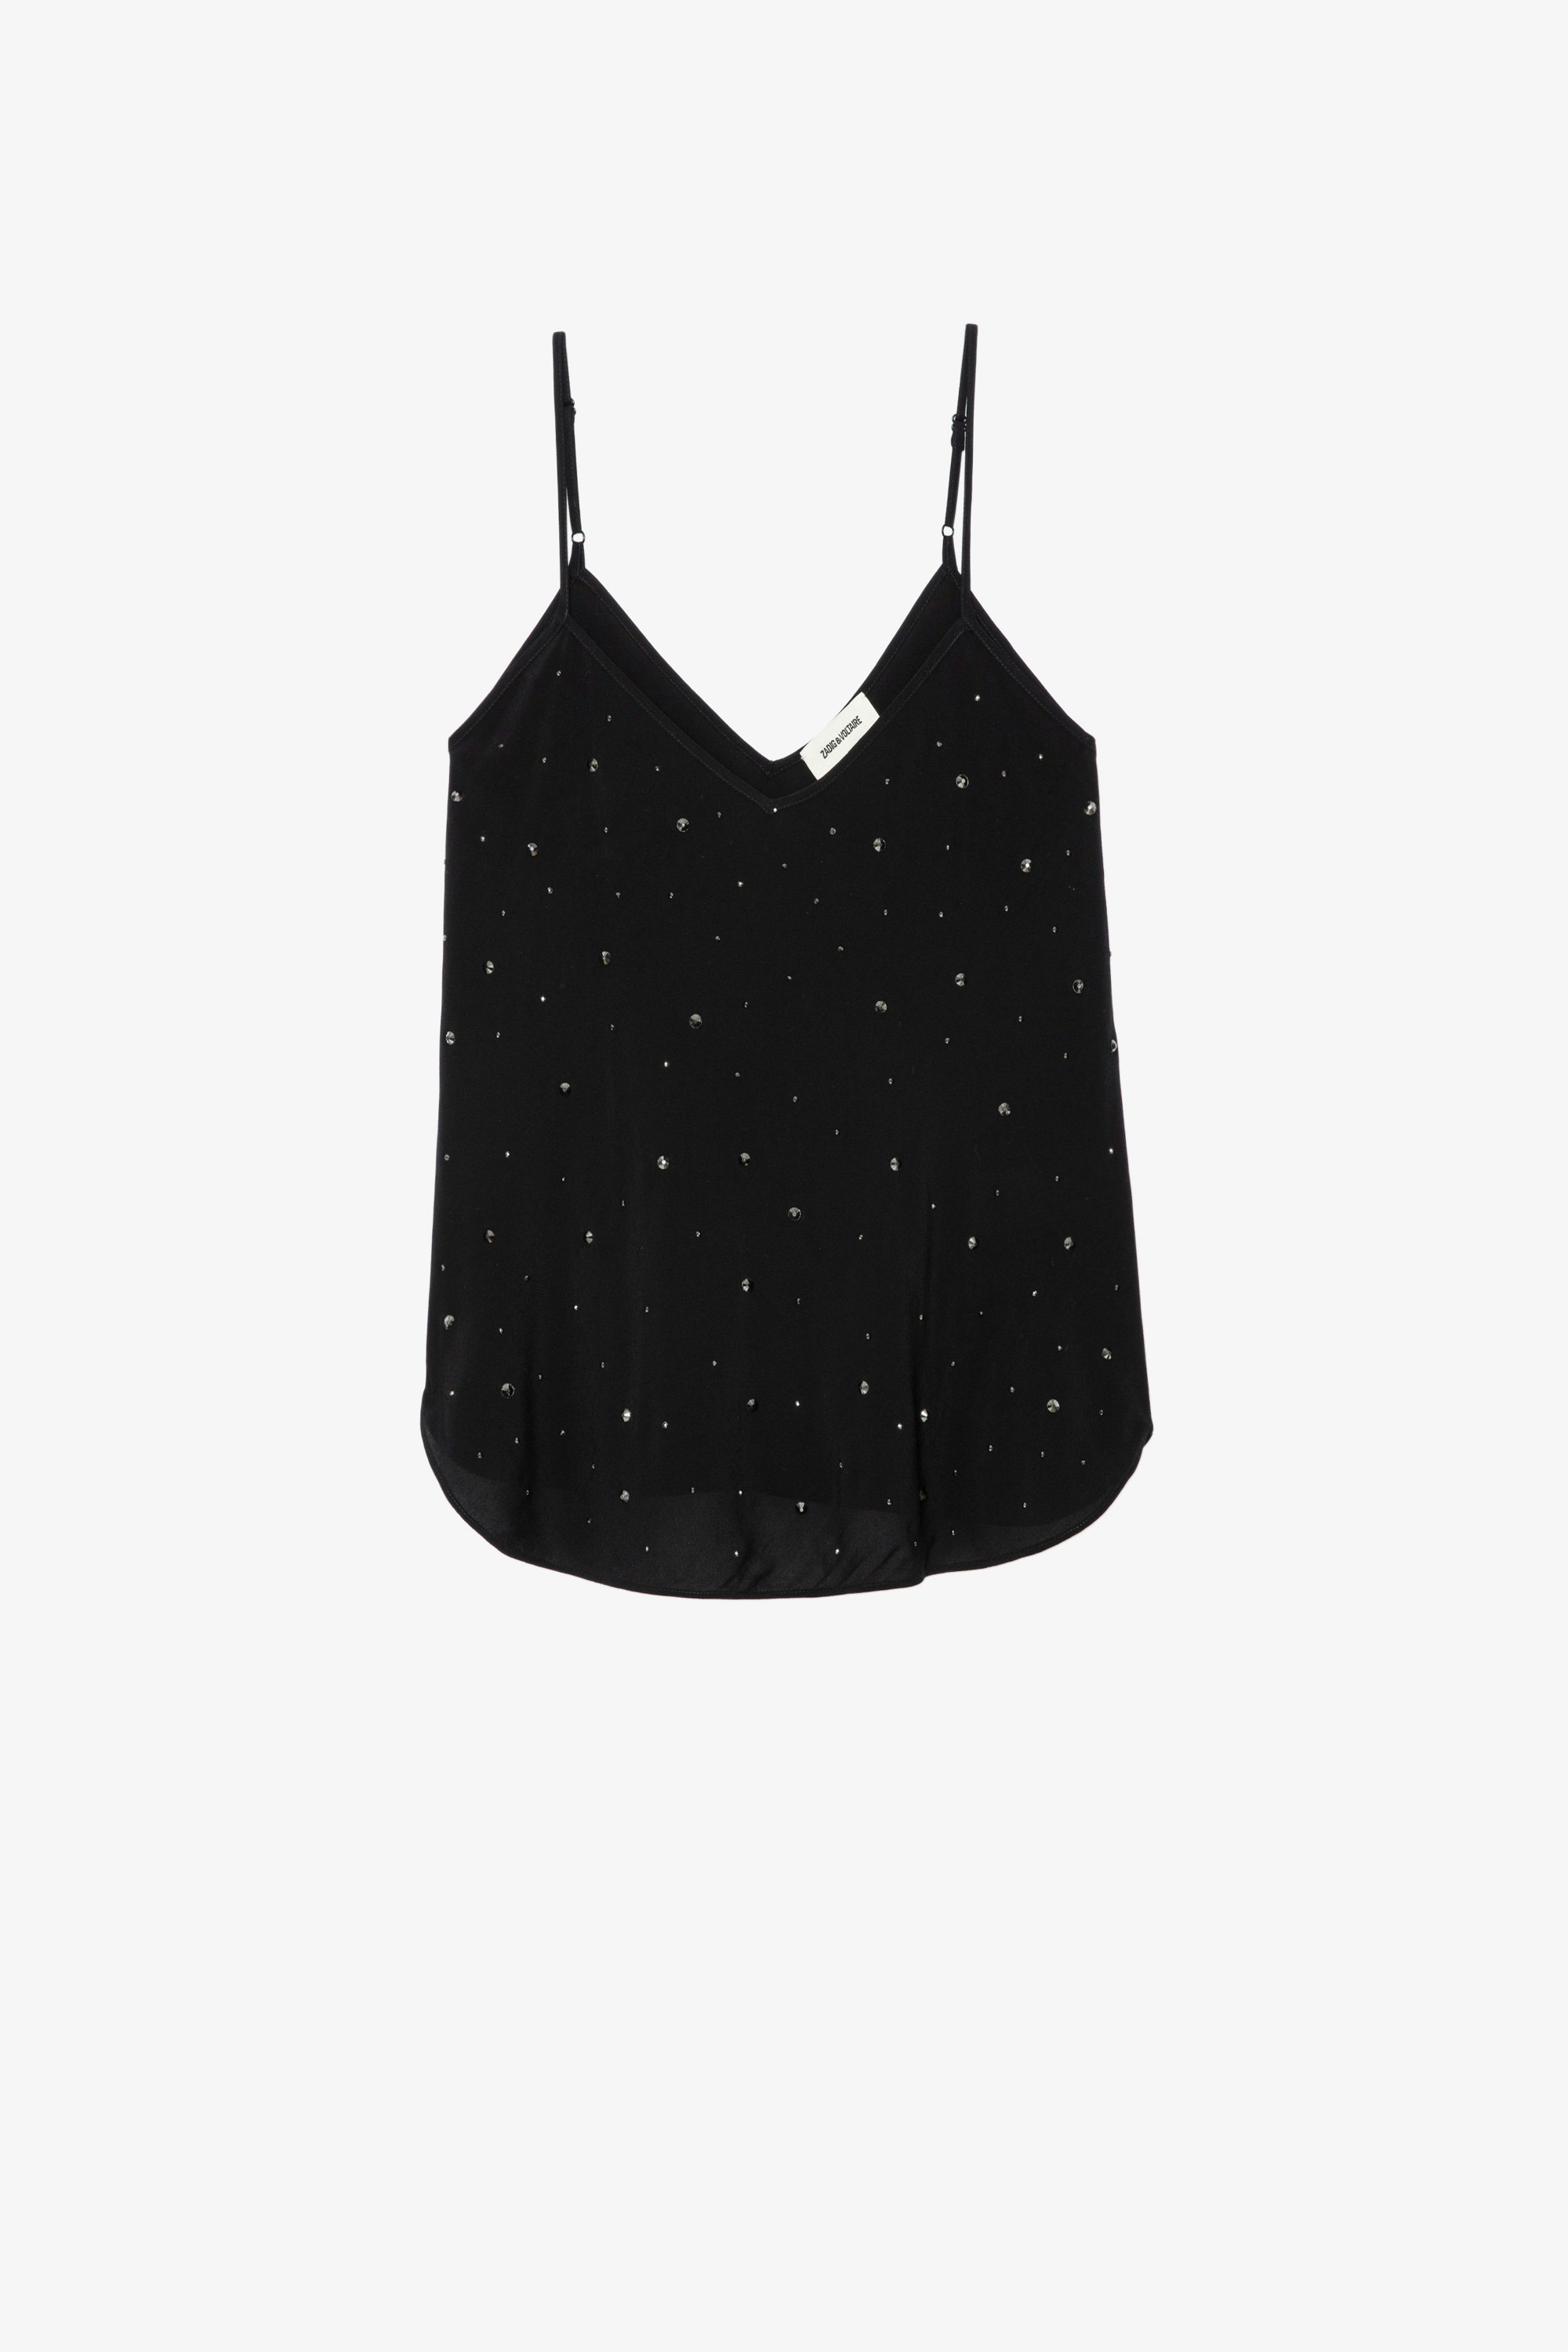 Casel Soft Strass キャミソール Women’s black camisole with crystal embellishment